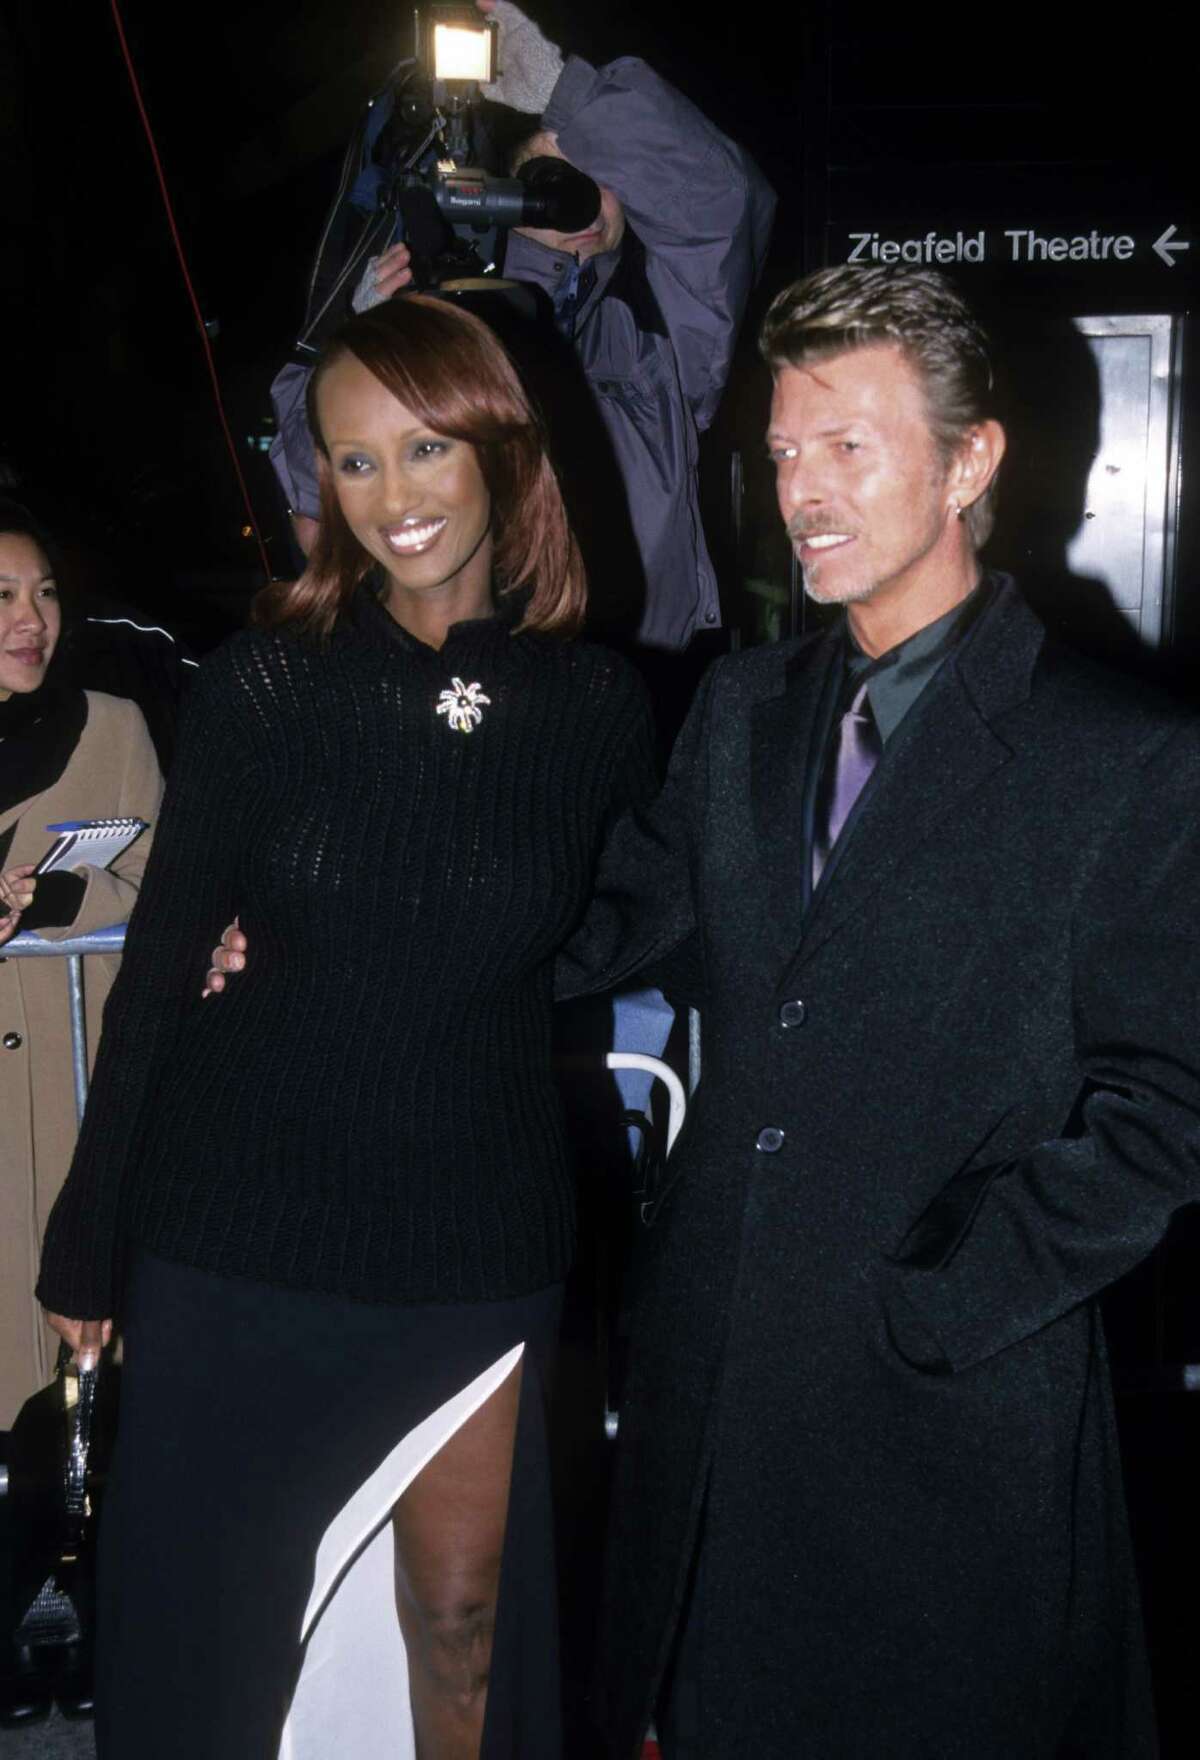 David Bowie and Iman - an international super-couple